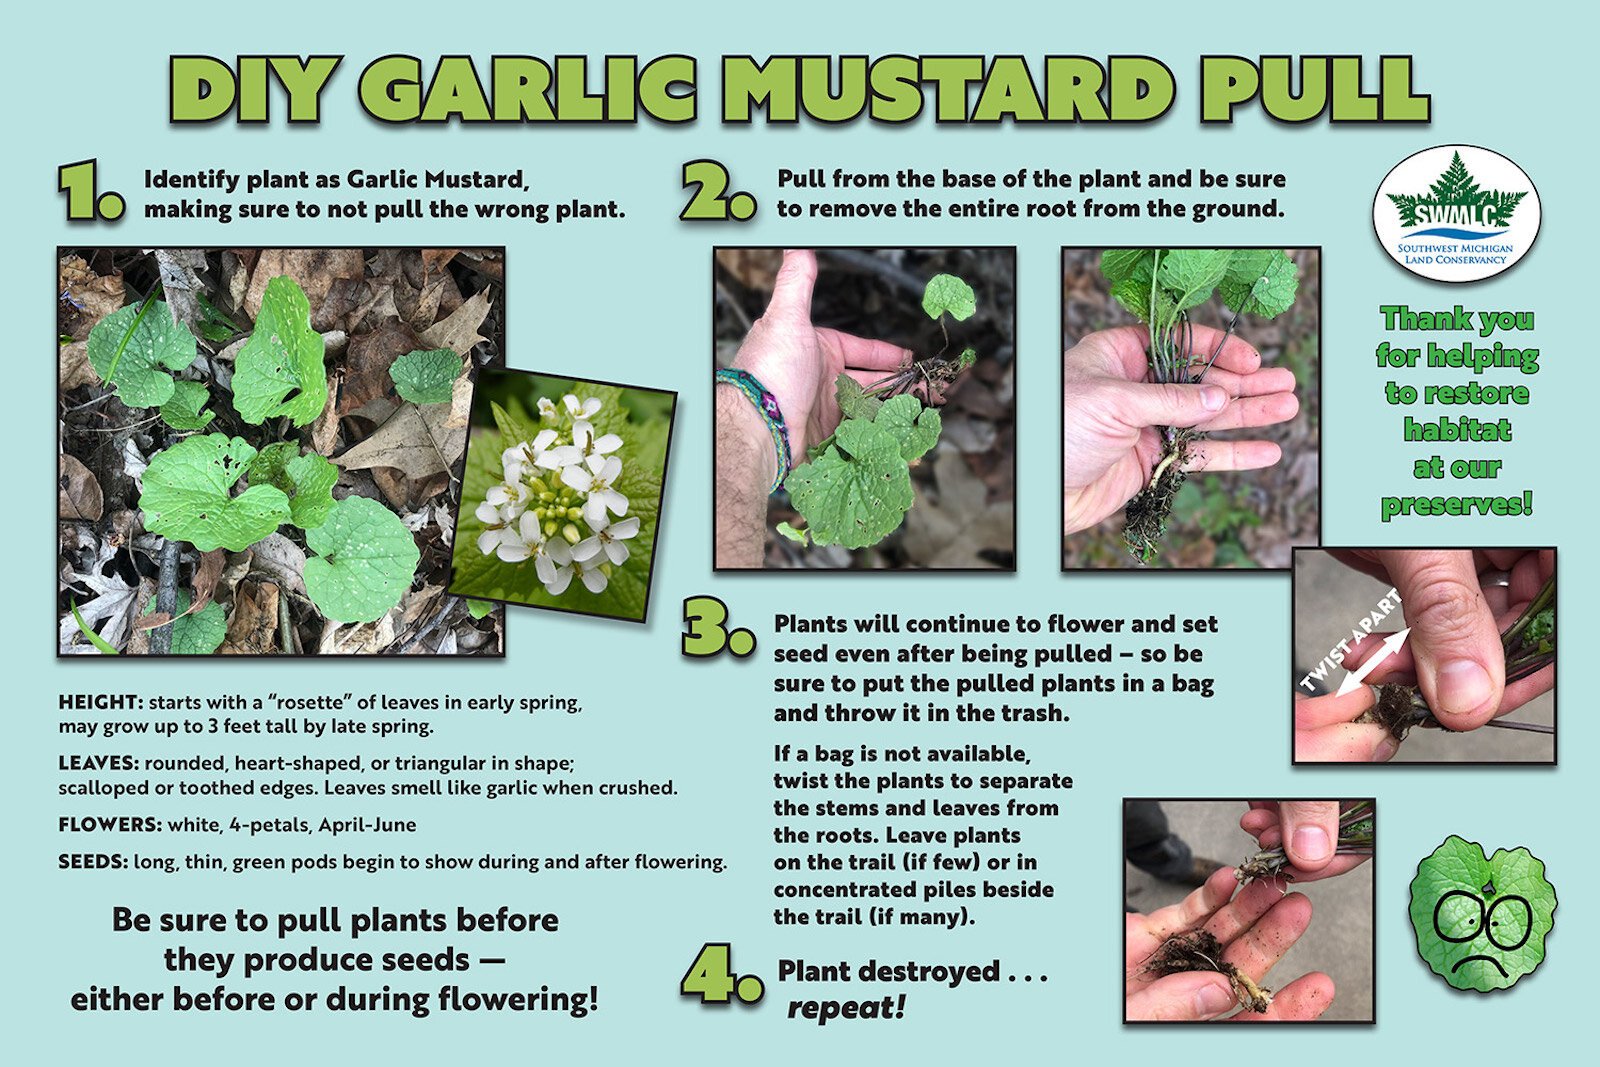 A guide on how to identify and pull garlic mustard weeds.